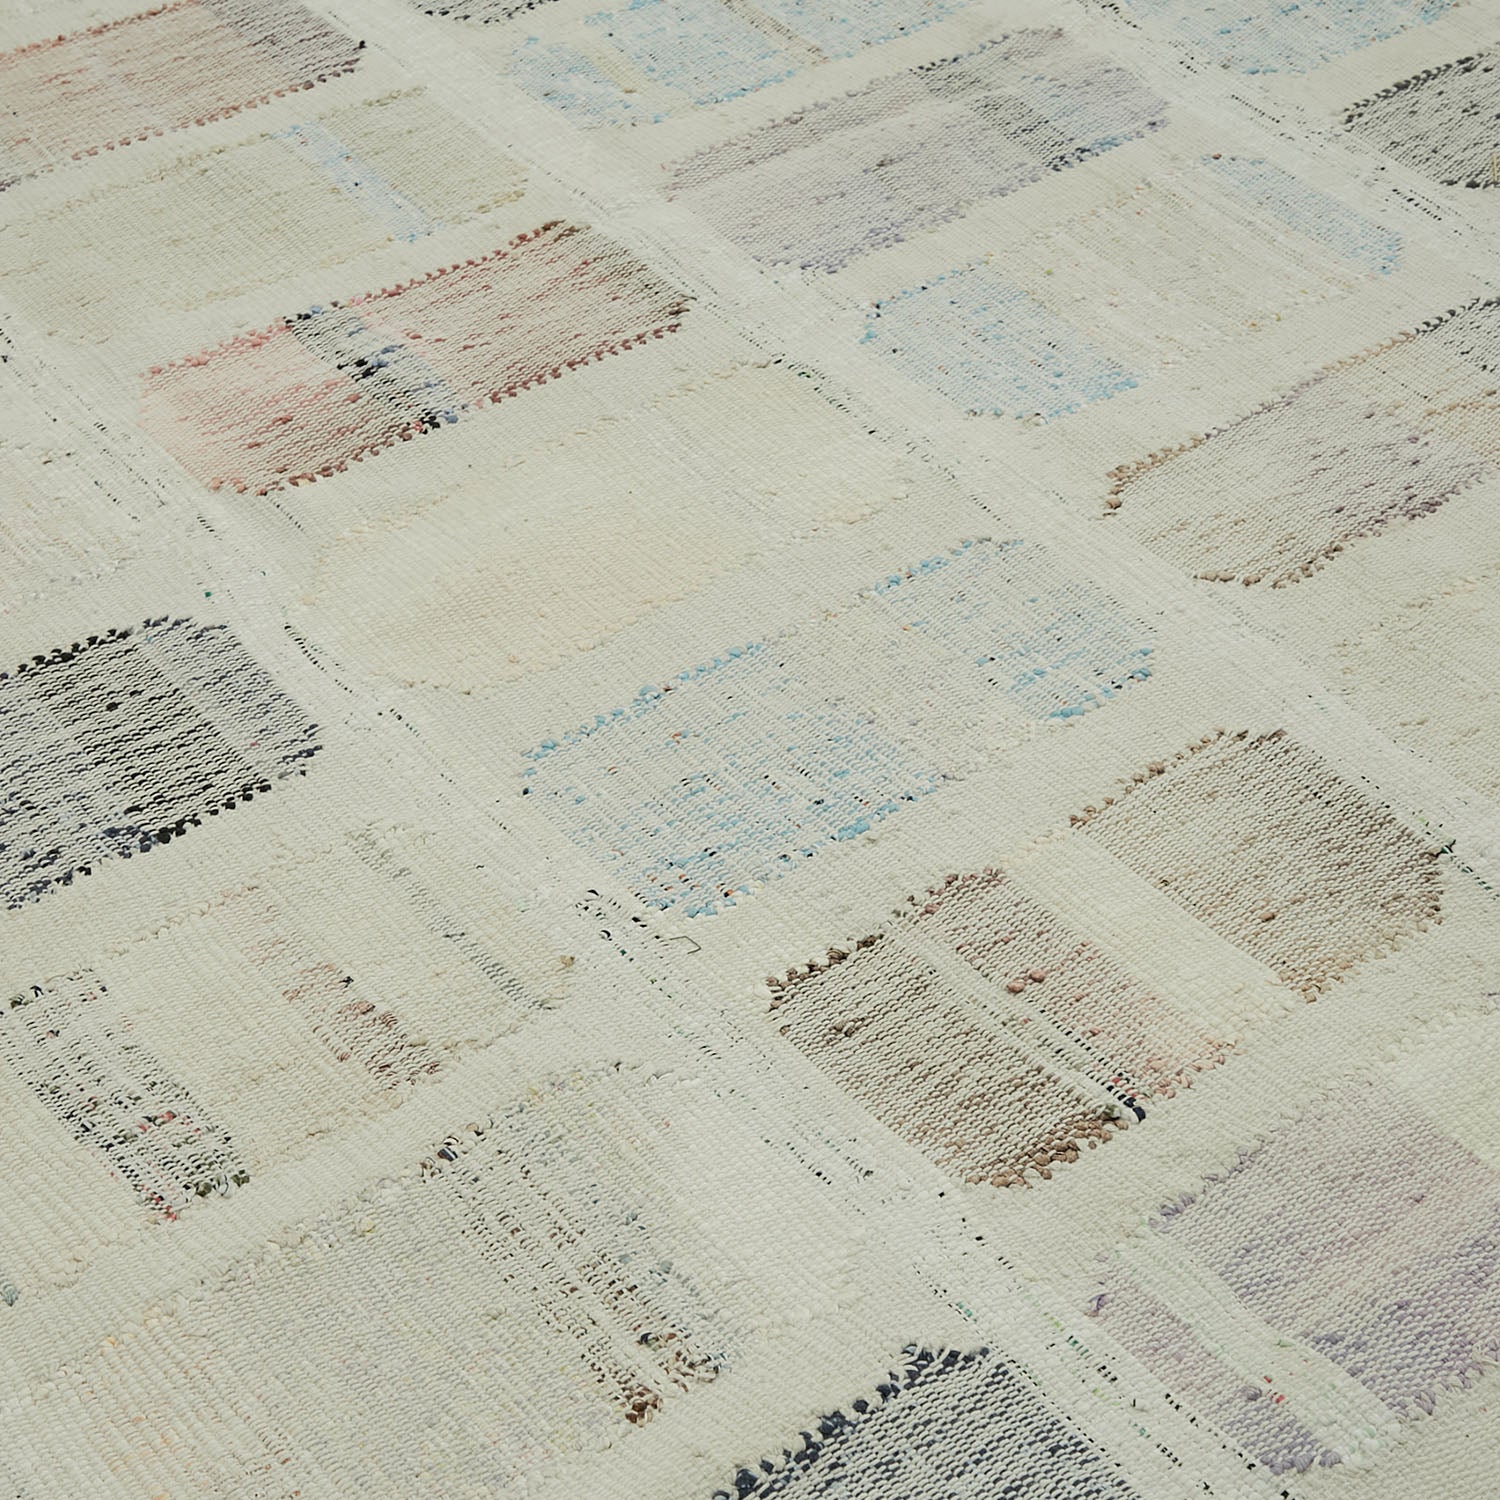 Close-up view of a patchwork rug with diverse textured squares